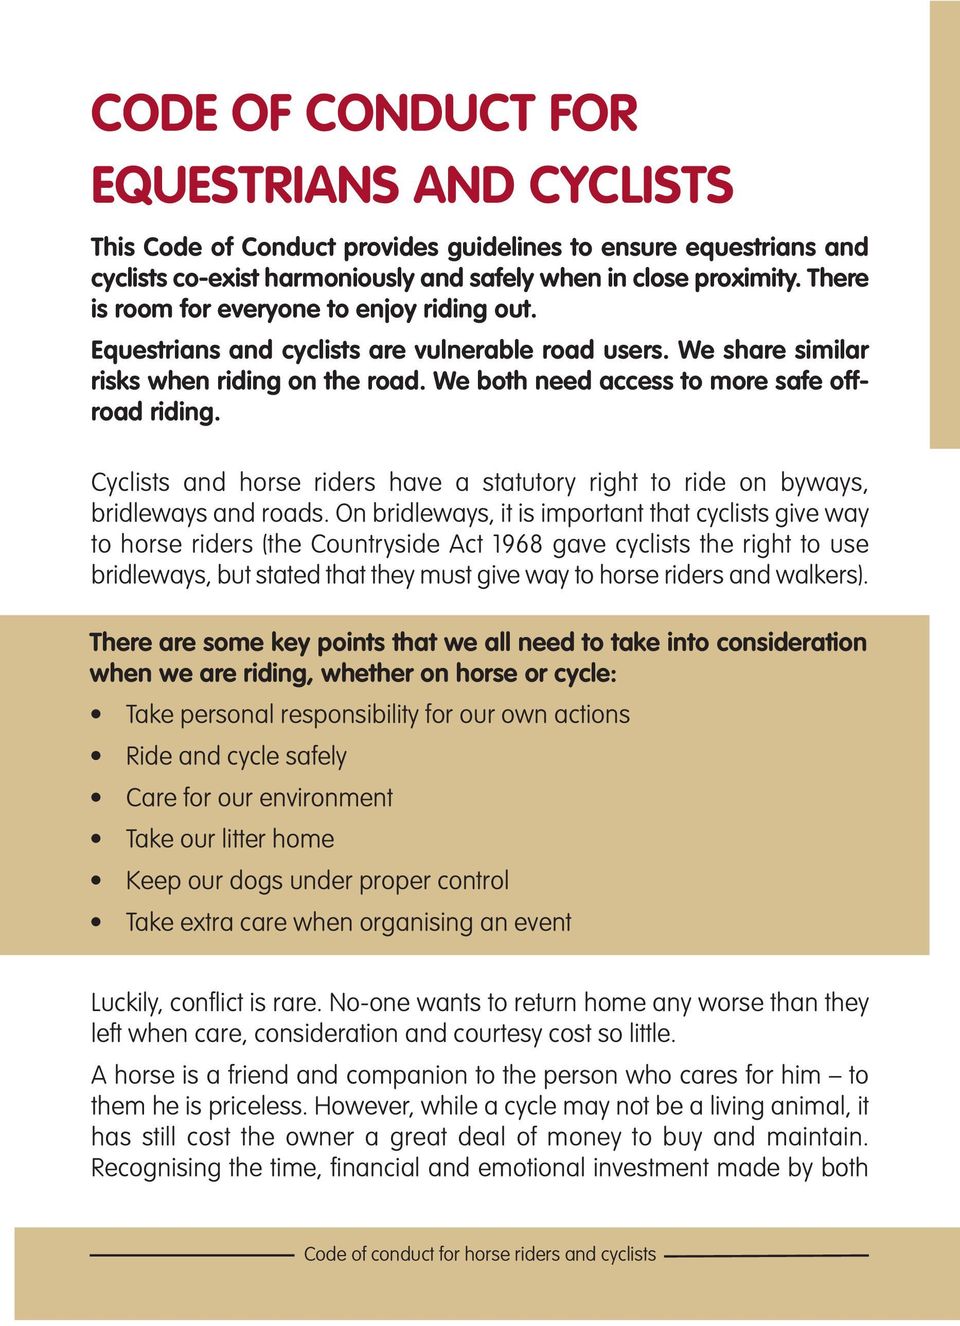 Cyclists and horse riders have a statutory right to ride on byways, bridleways and roads.